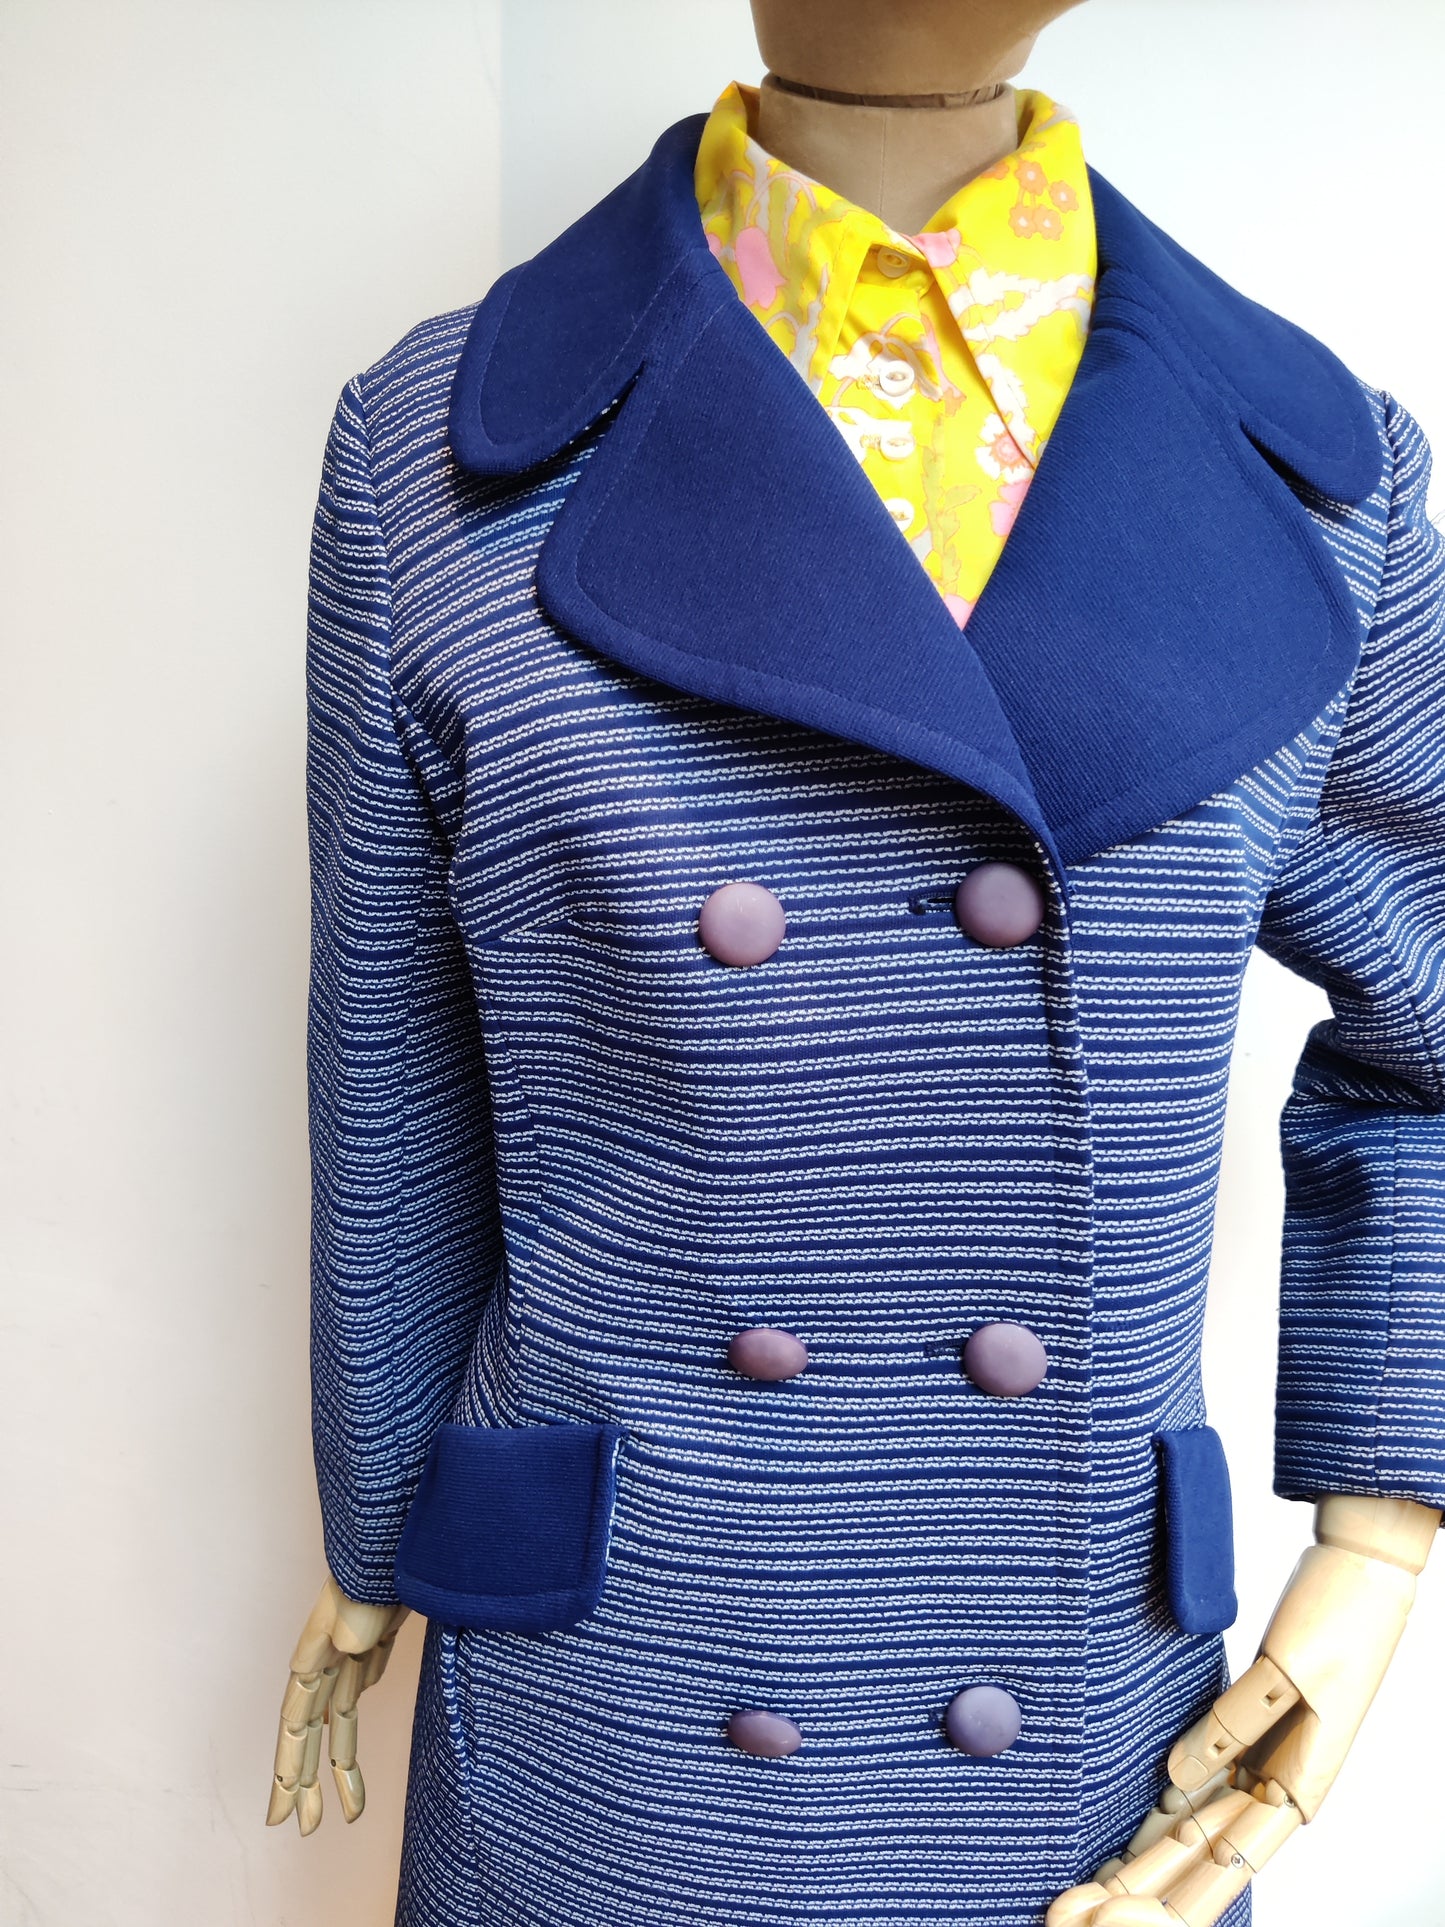 Lovely blue mod jacket with vintage collar